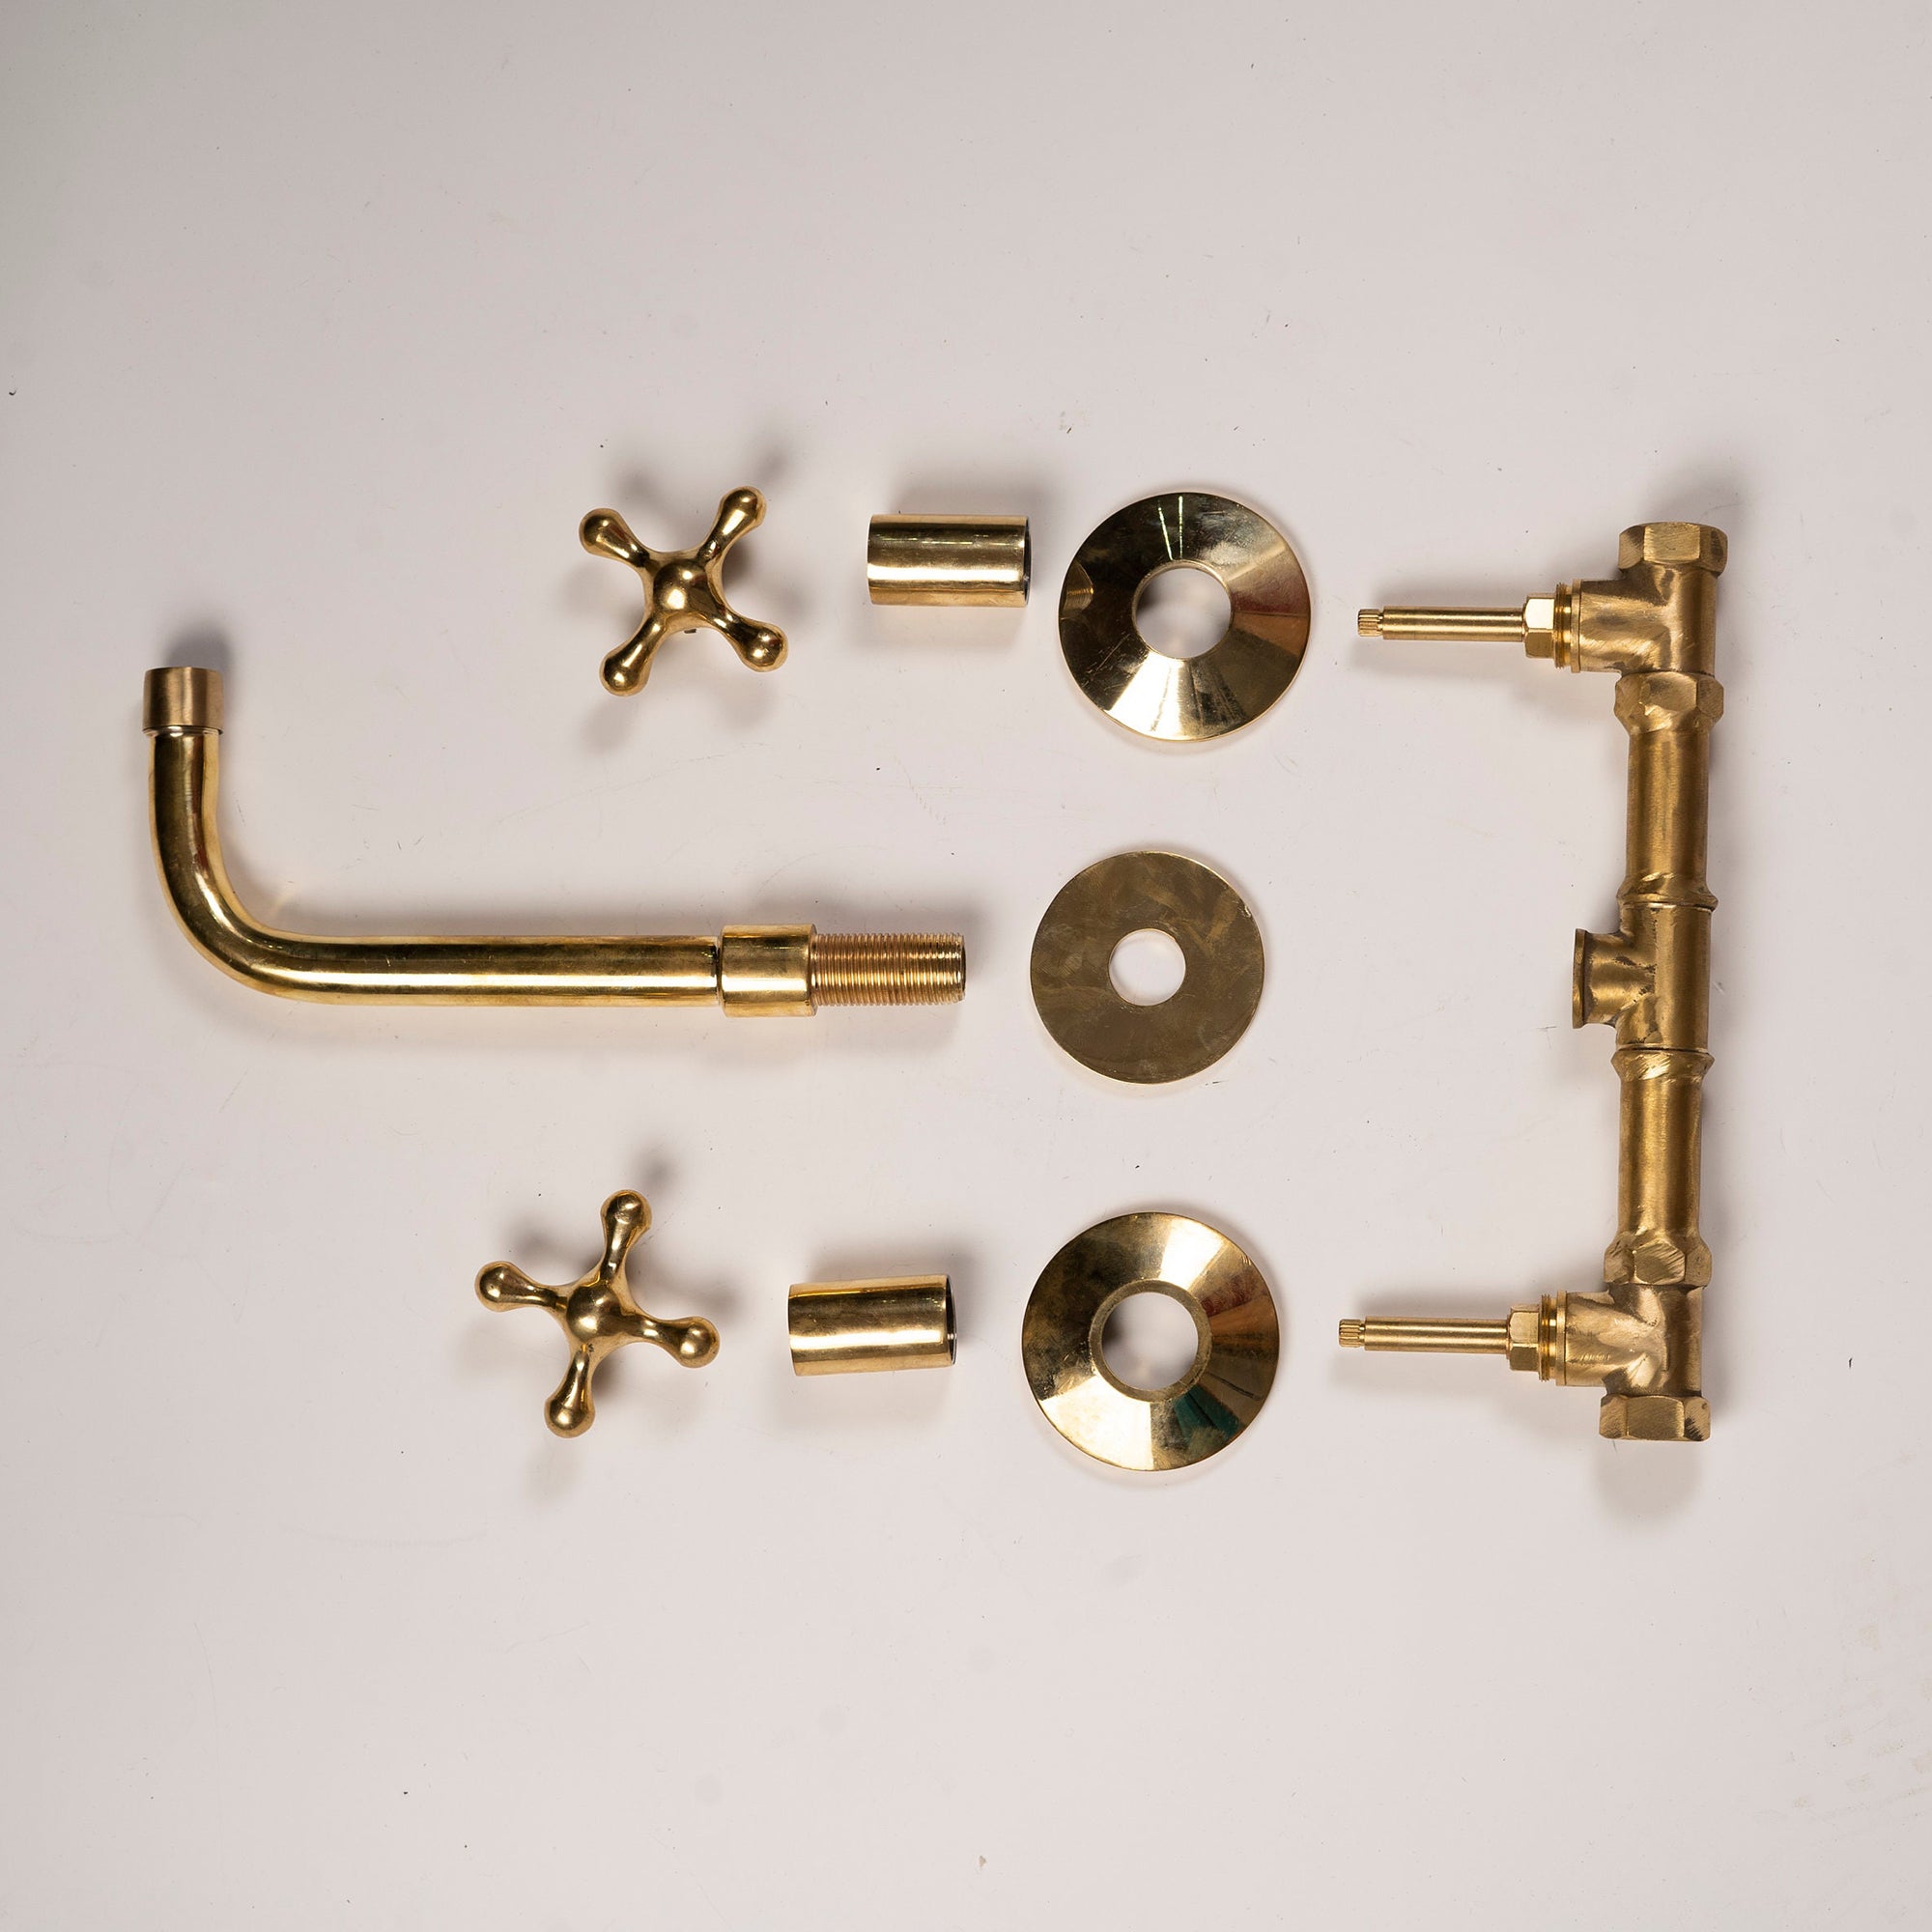 Unlacquered Brass Wall Mounted Bathroom Faucet, Solid Brass Bathroom Faucet With Cross Handle